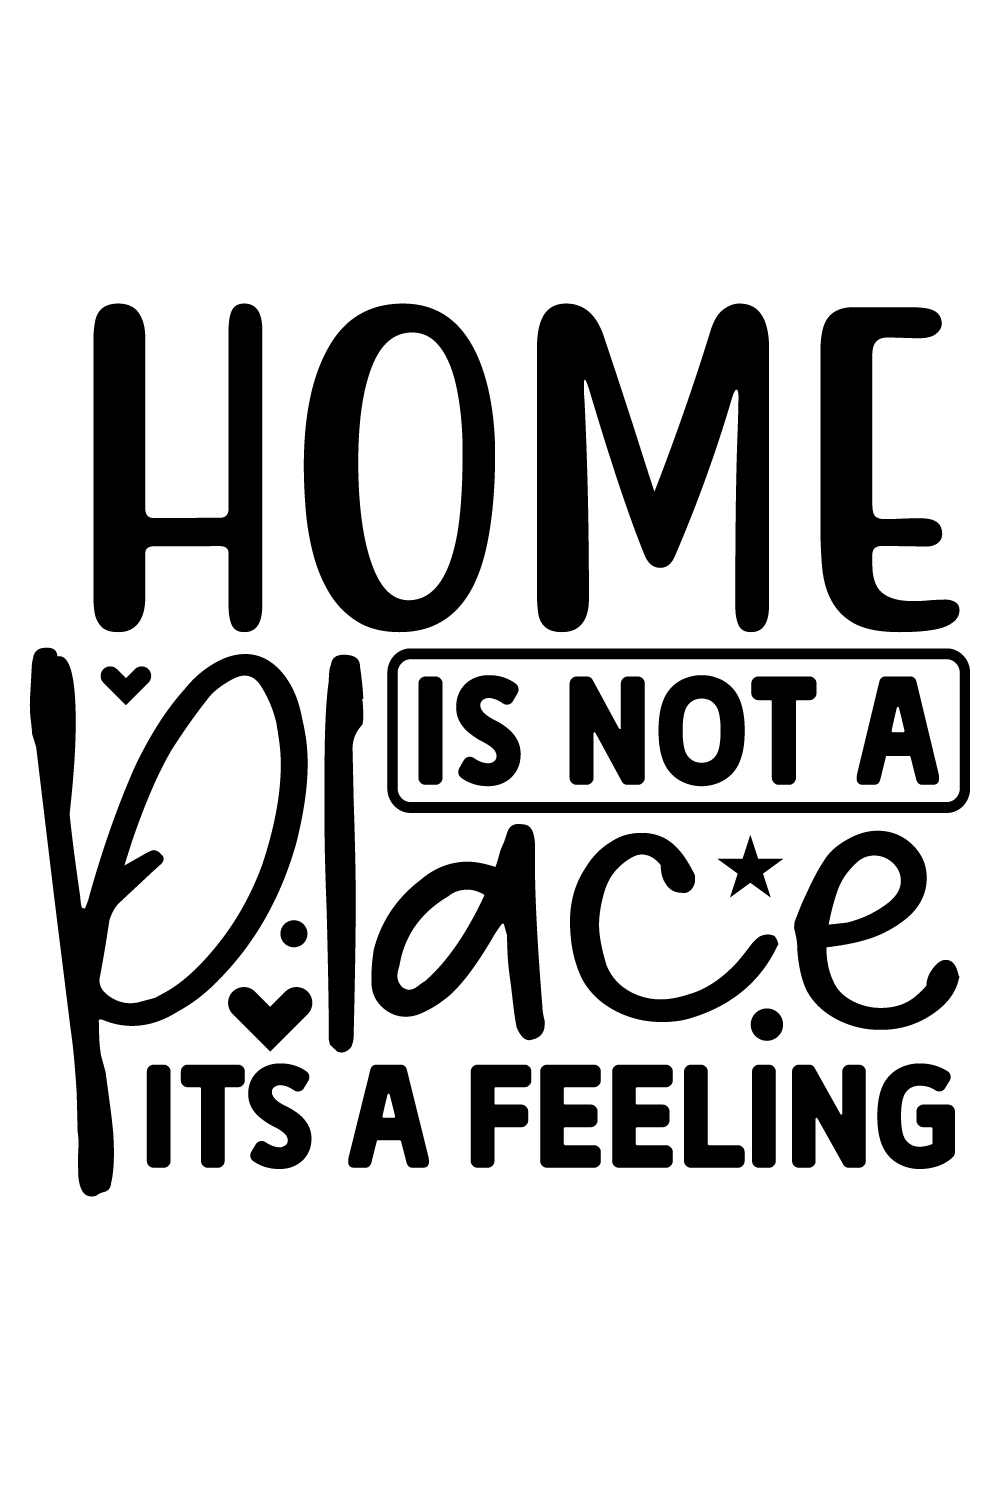 Home is not a place its a feeling pinterest preview image.